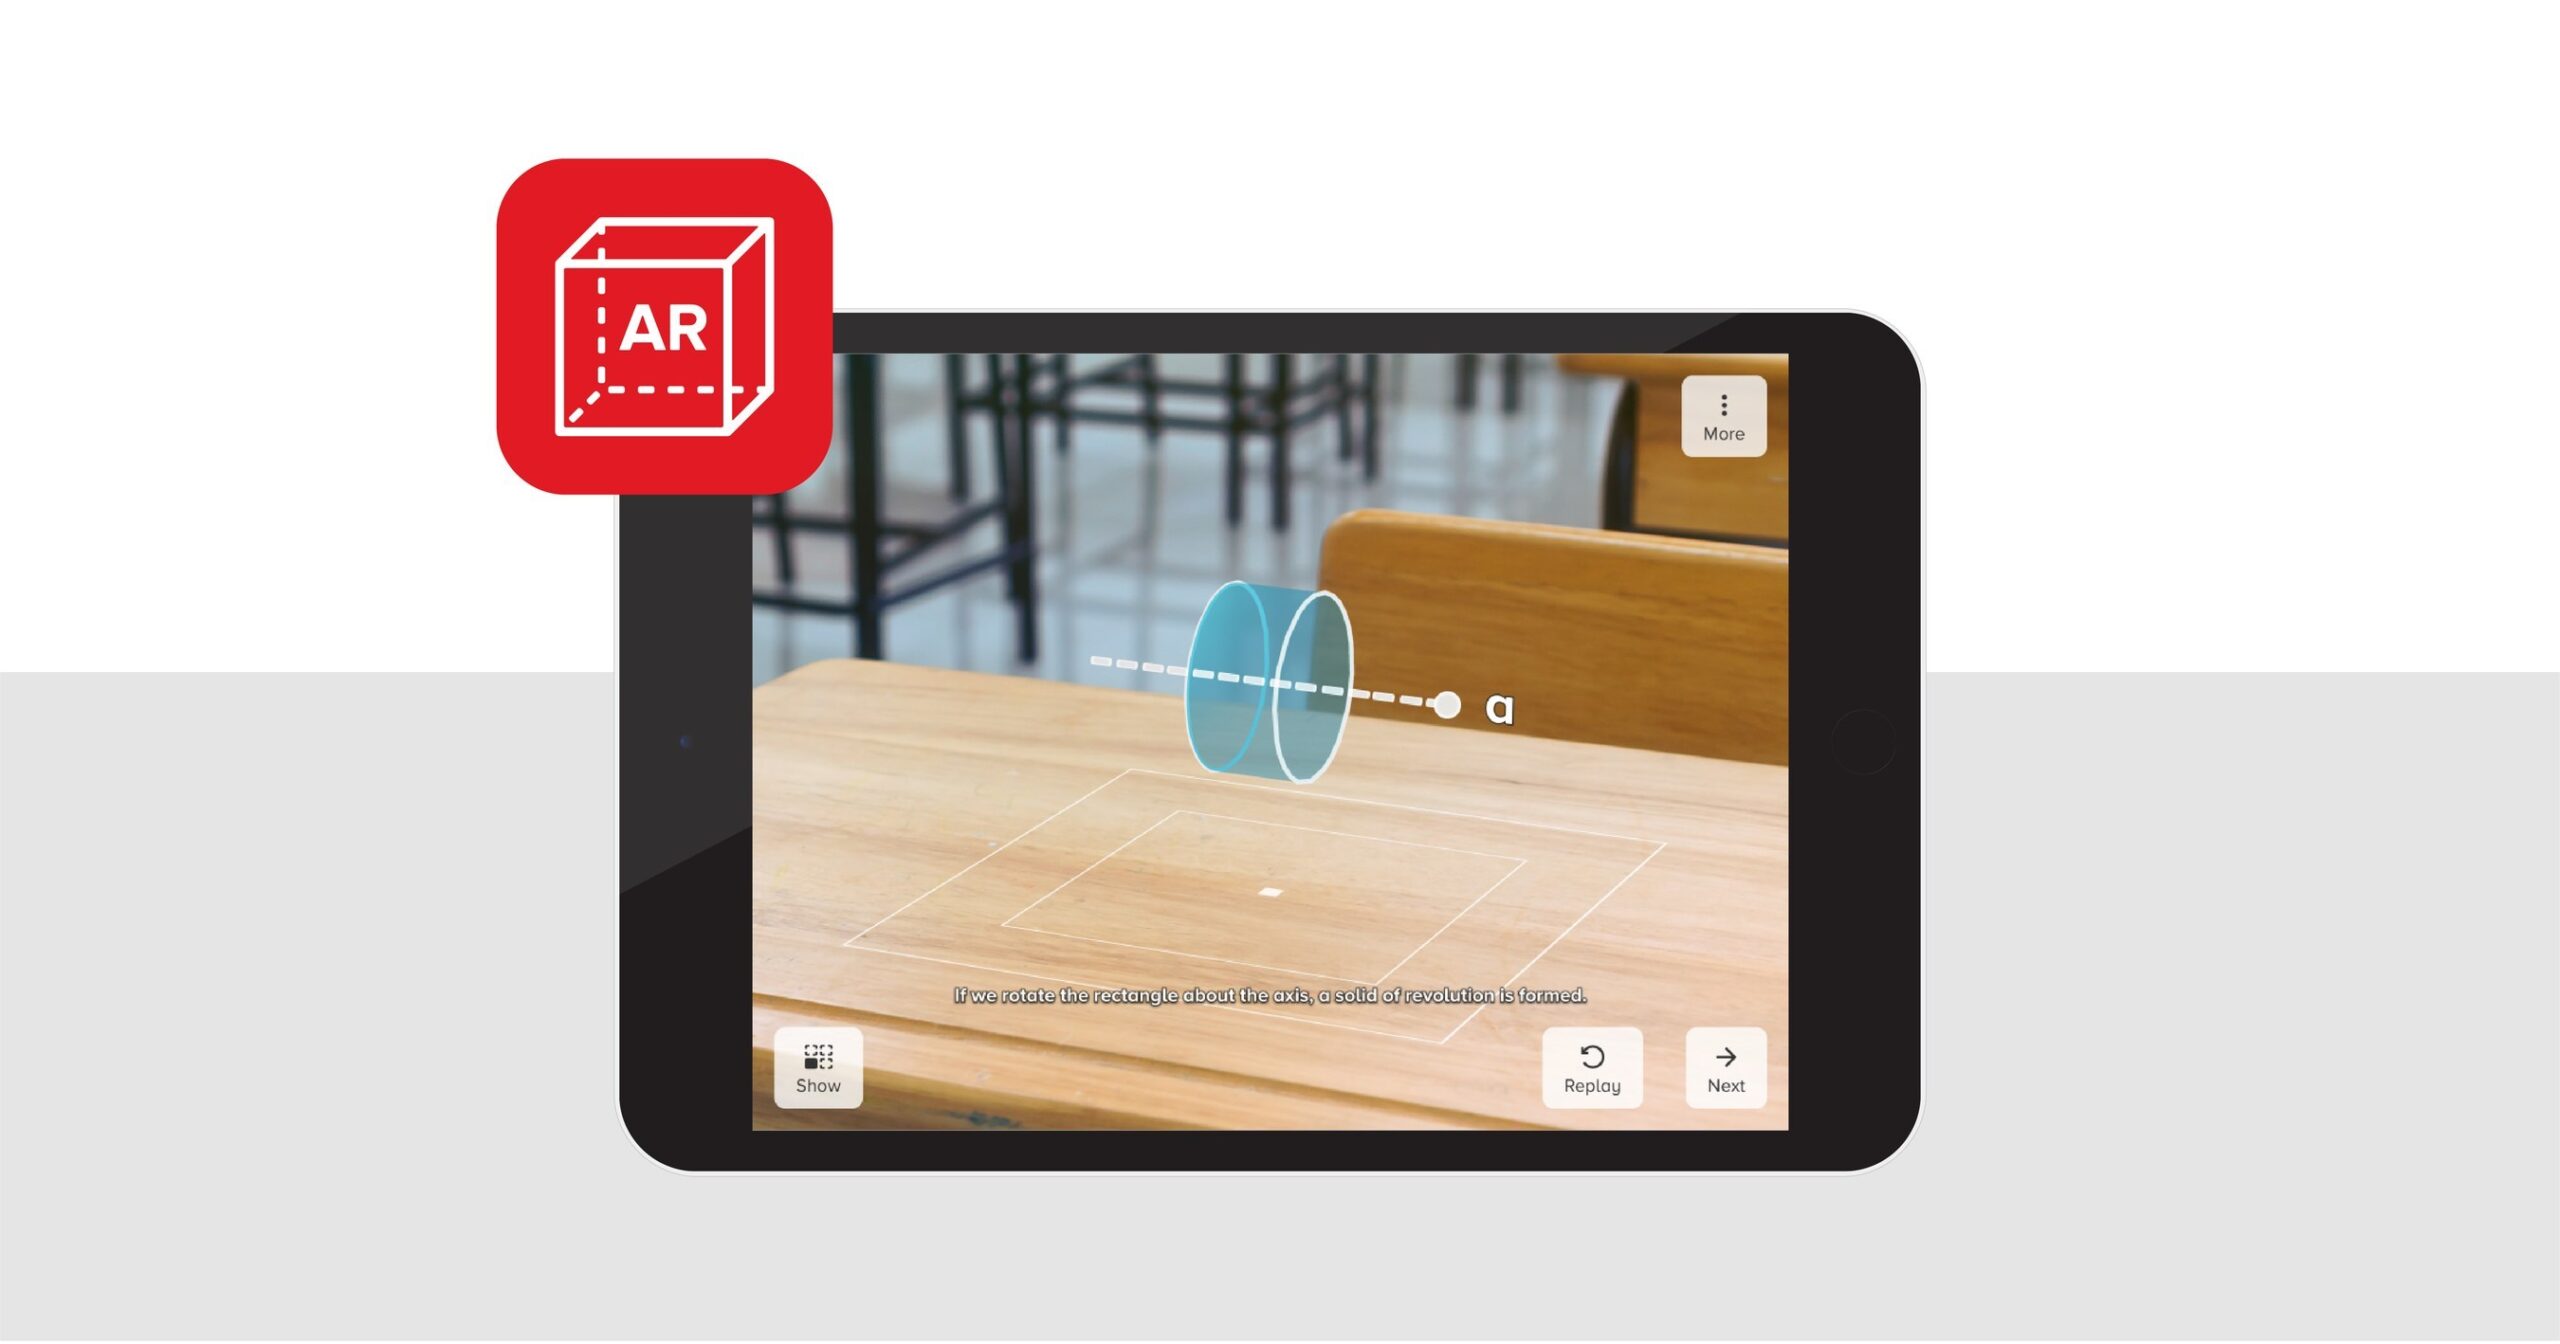 McGraw Hill and Verizon Bring Learning to Life with Free Augmented Reality App